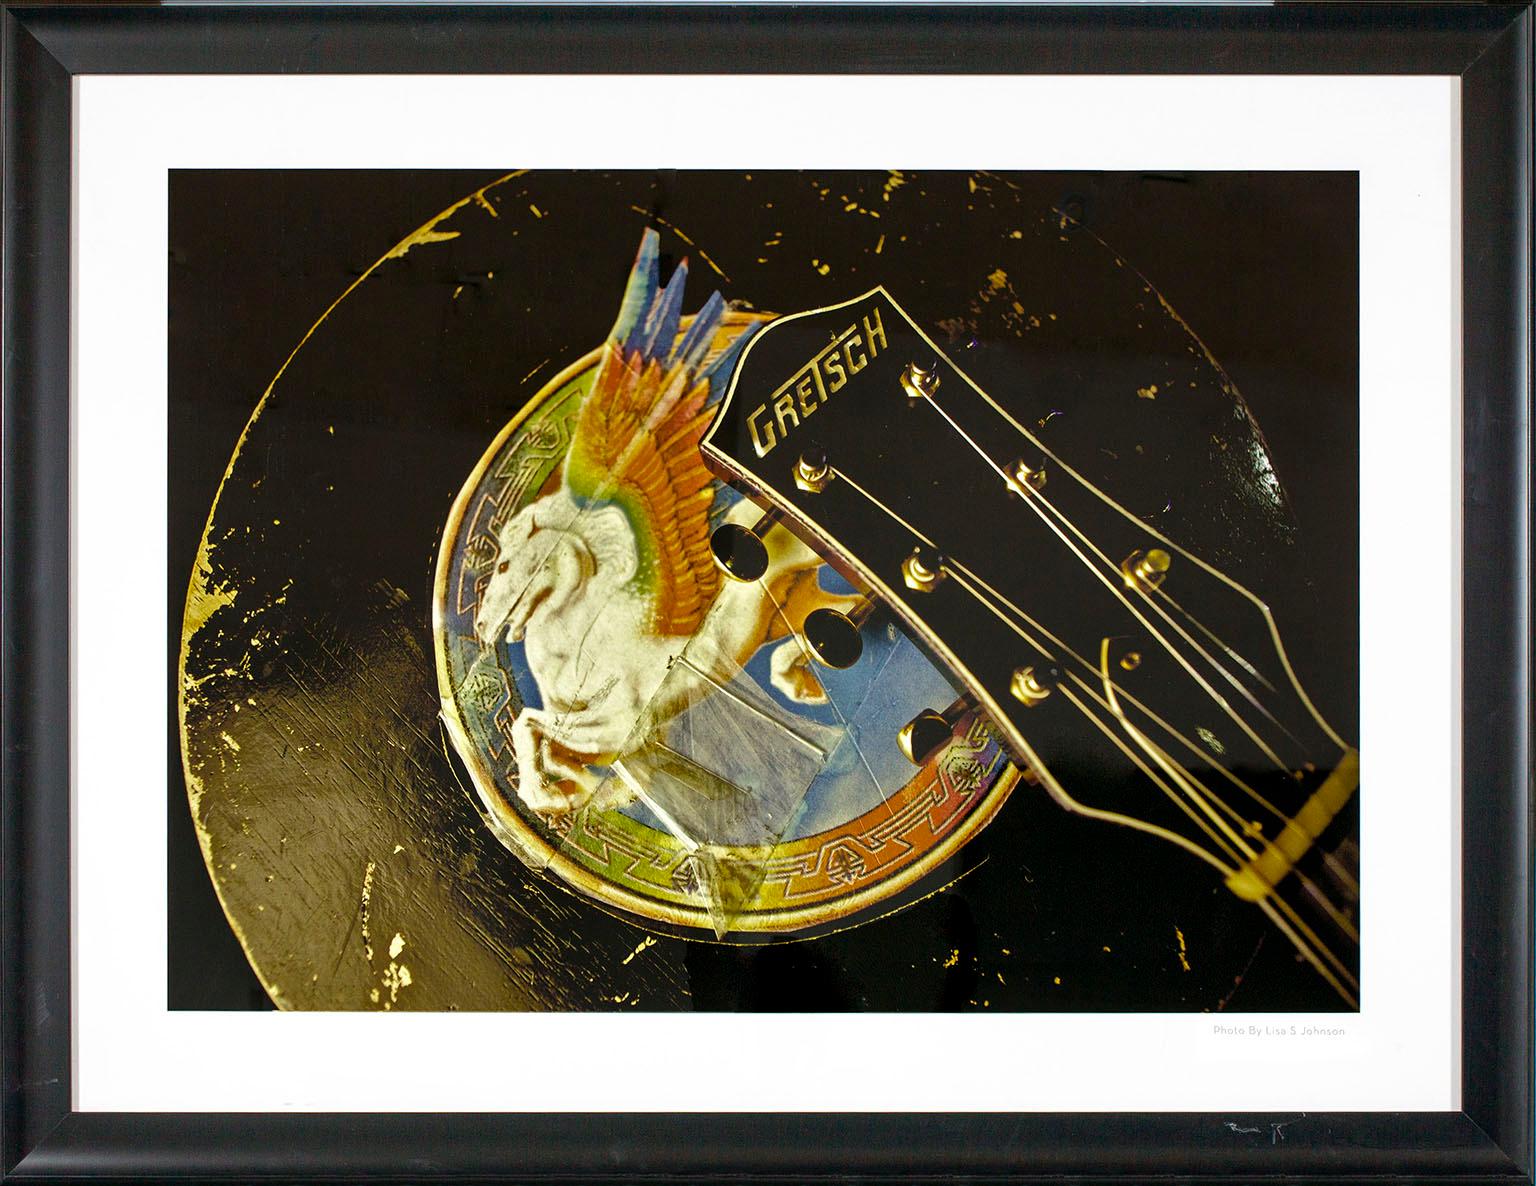 "Steve Miller 'Gretsch Guitar'" framed color photograph by Lisa S. Preston taken for her book "108 Rock Star Guitars." "Photo by Lisa S. Johnson" printed on front lower right corner. Image size: 24 x 33 3/4 inches. This photograph was previously